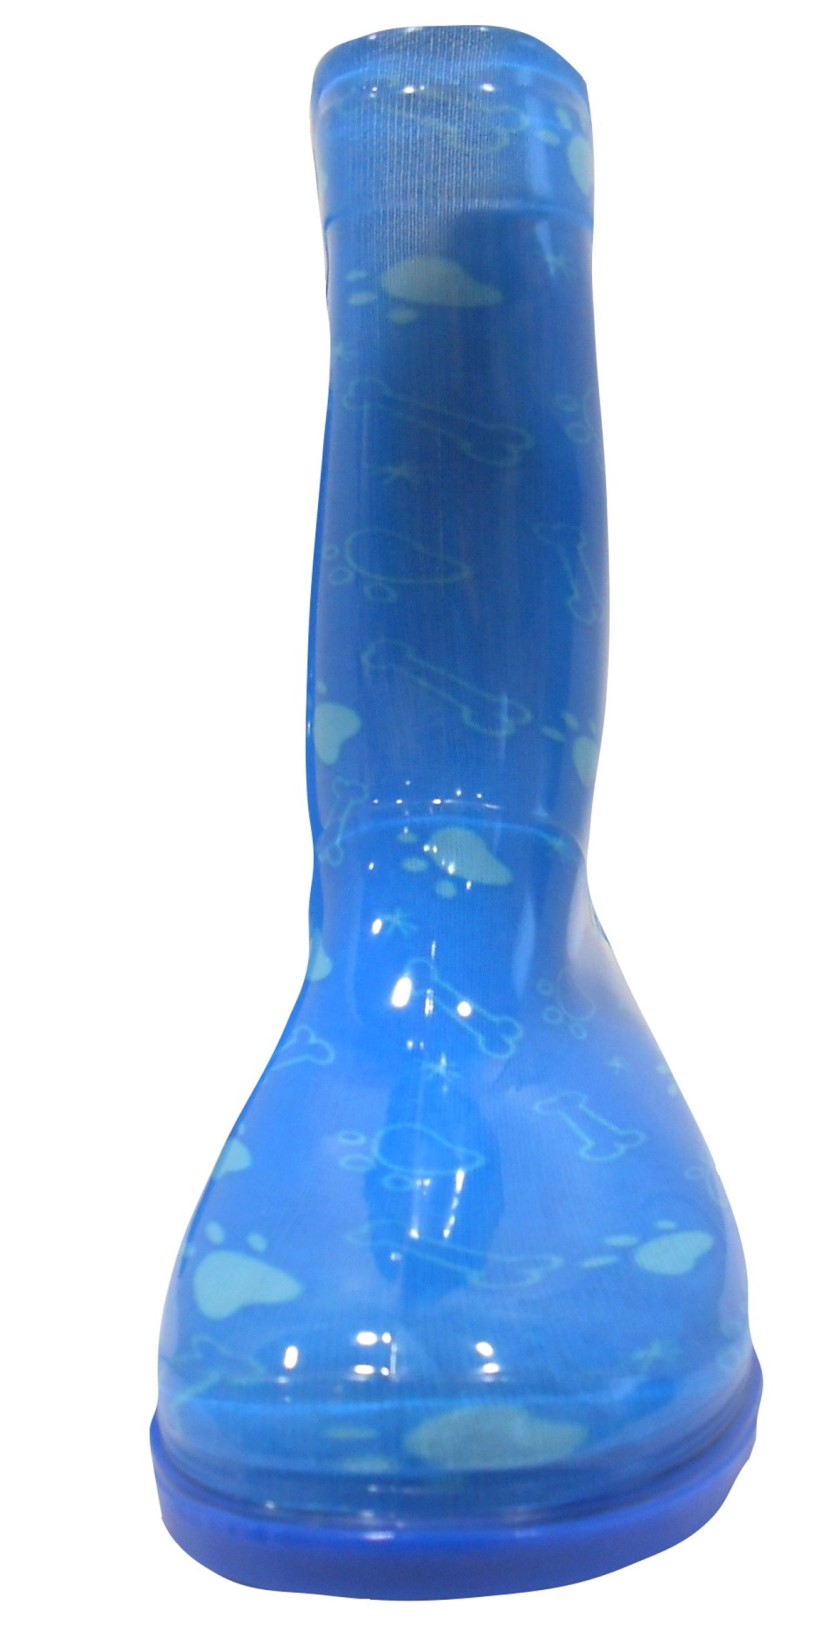 PWP BLUE WELLY FRONT (1).jpg  by Thingimijigs